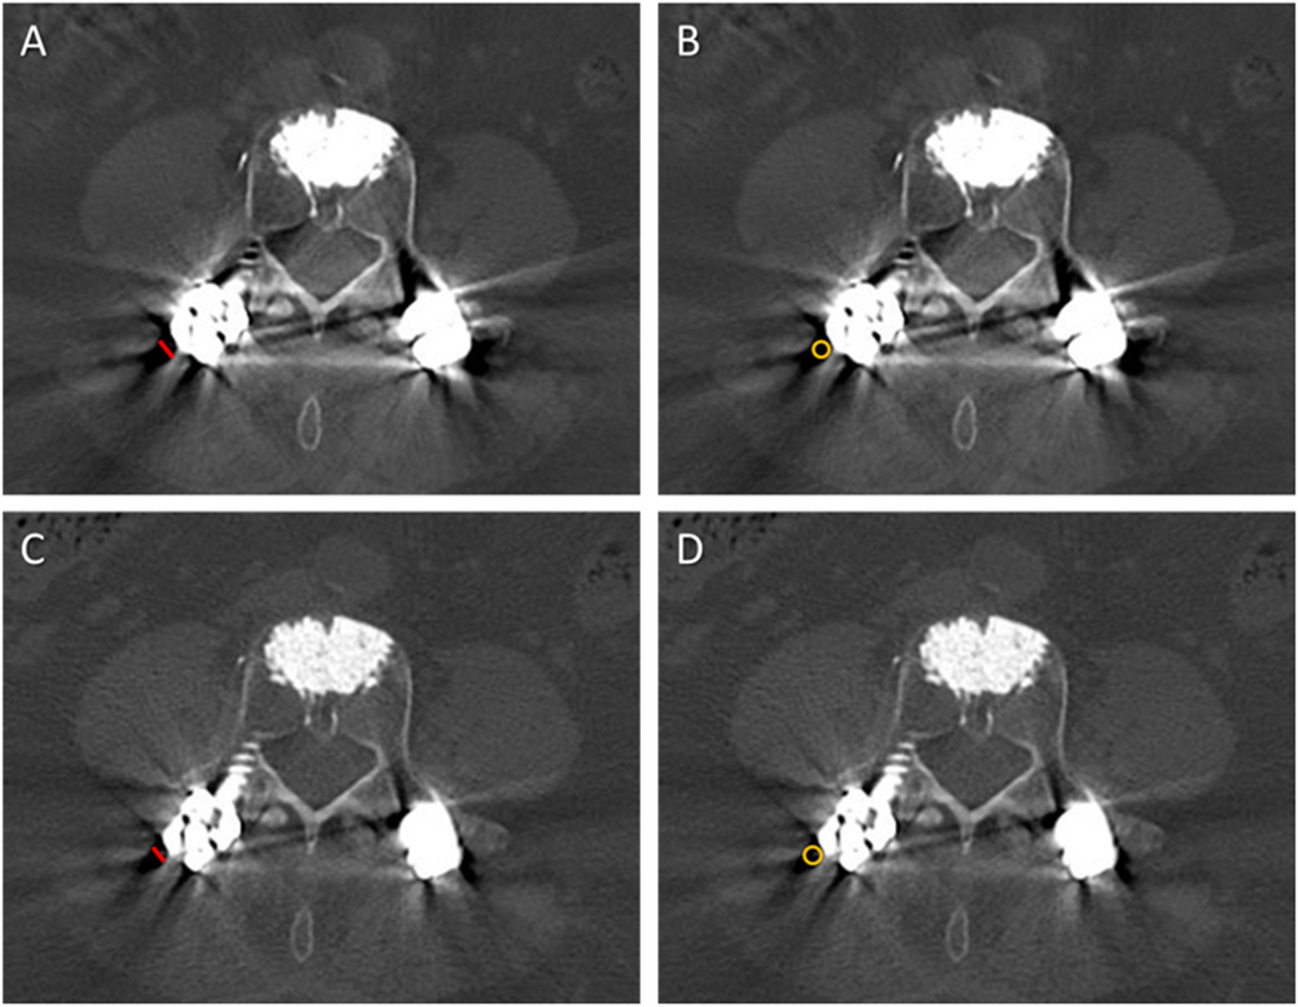 Superior metal artifact reduction of tin-filtered low-dose CT in imaging of lumbar spinal instrumentation compared to conventional computed tomography